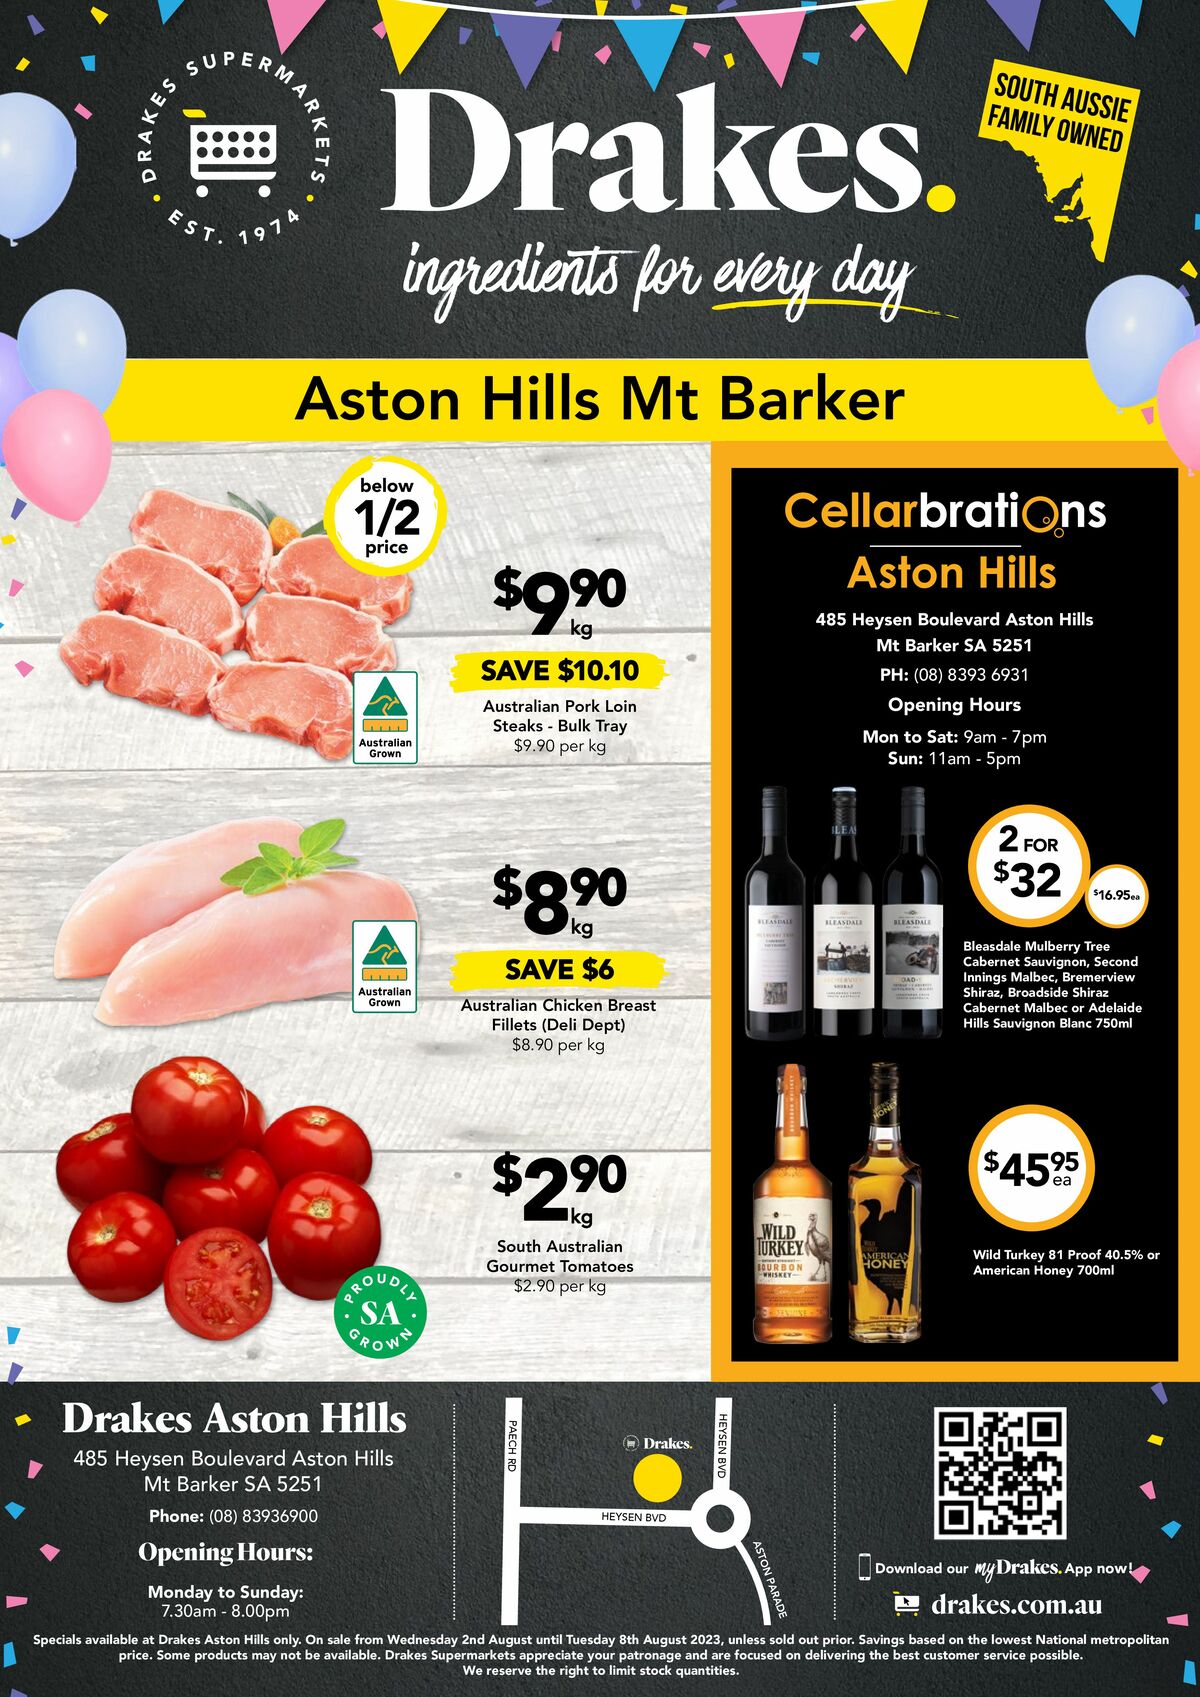 Drakes Aston Hills, Mount Barker Catalogues from 2 August